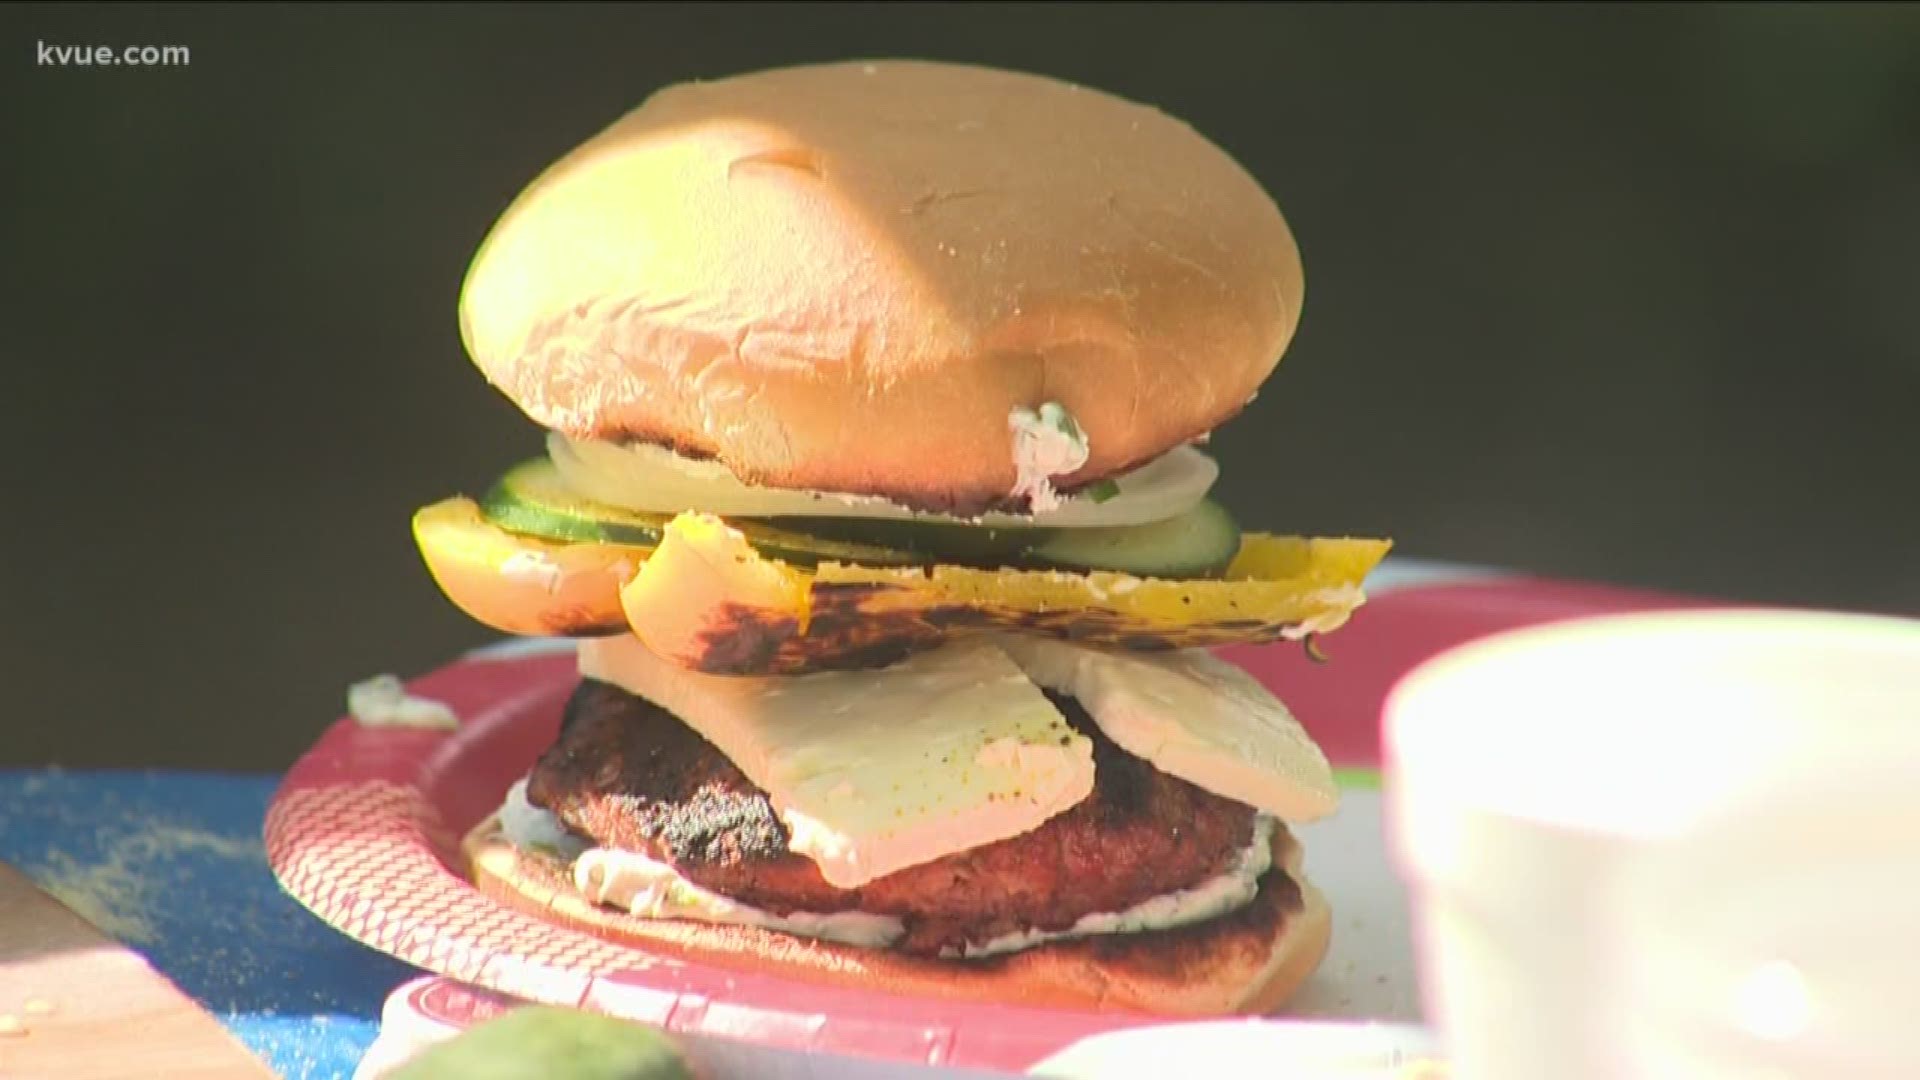 If you are into trying different styles, we have a recipe for you today. Chef Tim Muensch from Brama in north Austin shows us how to prepare a greek style burger in today's Foodie Friday.